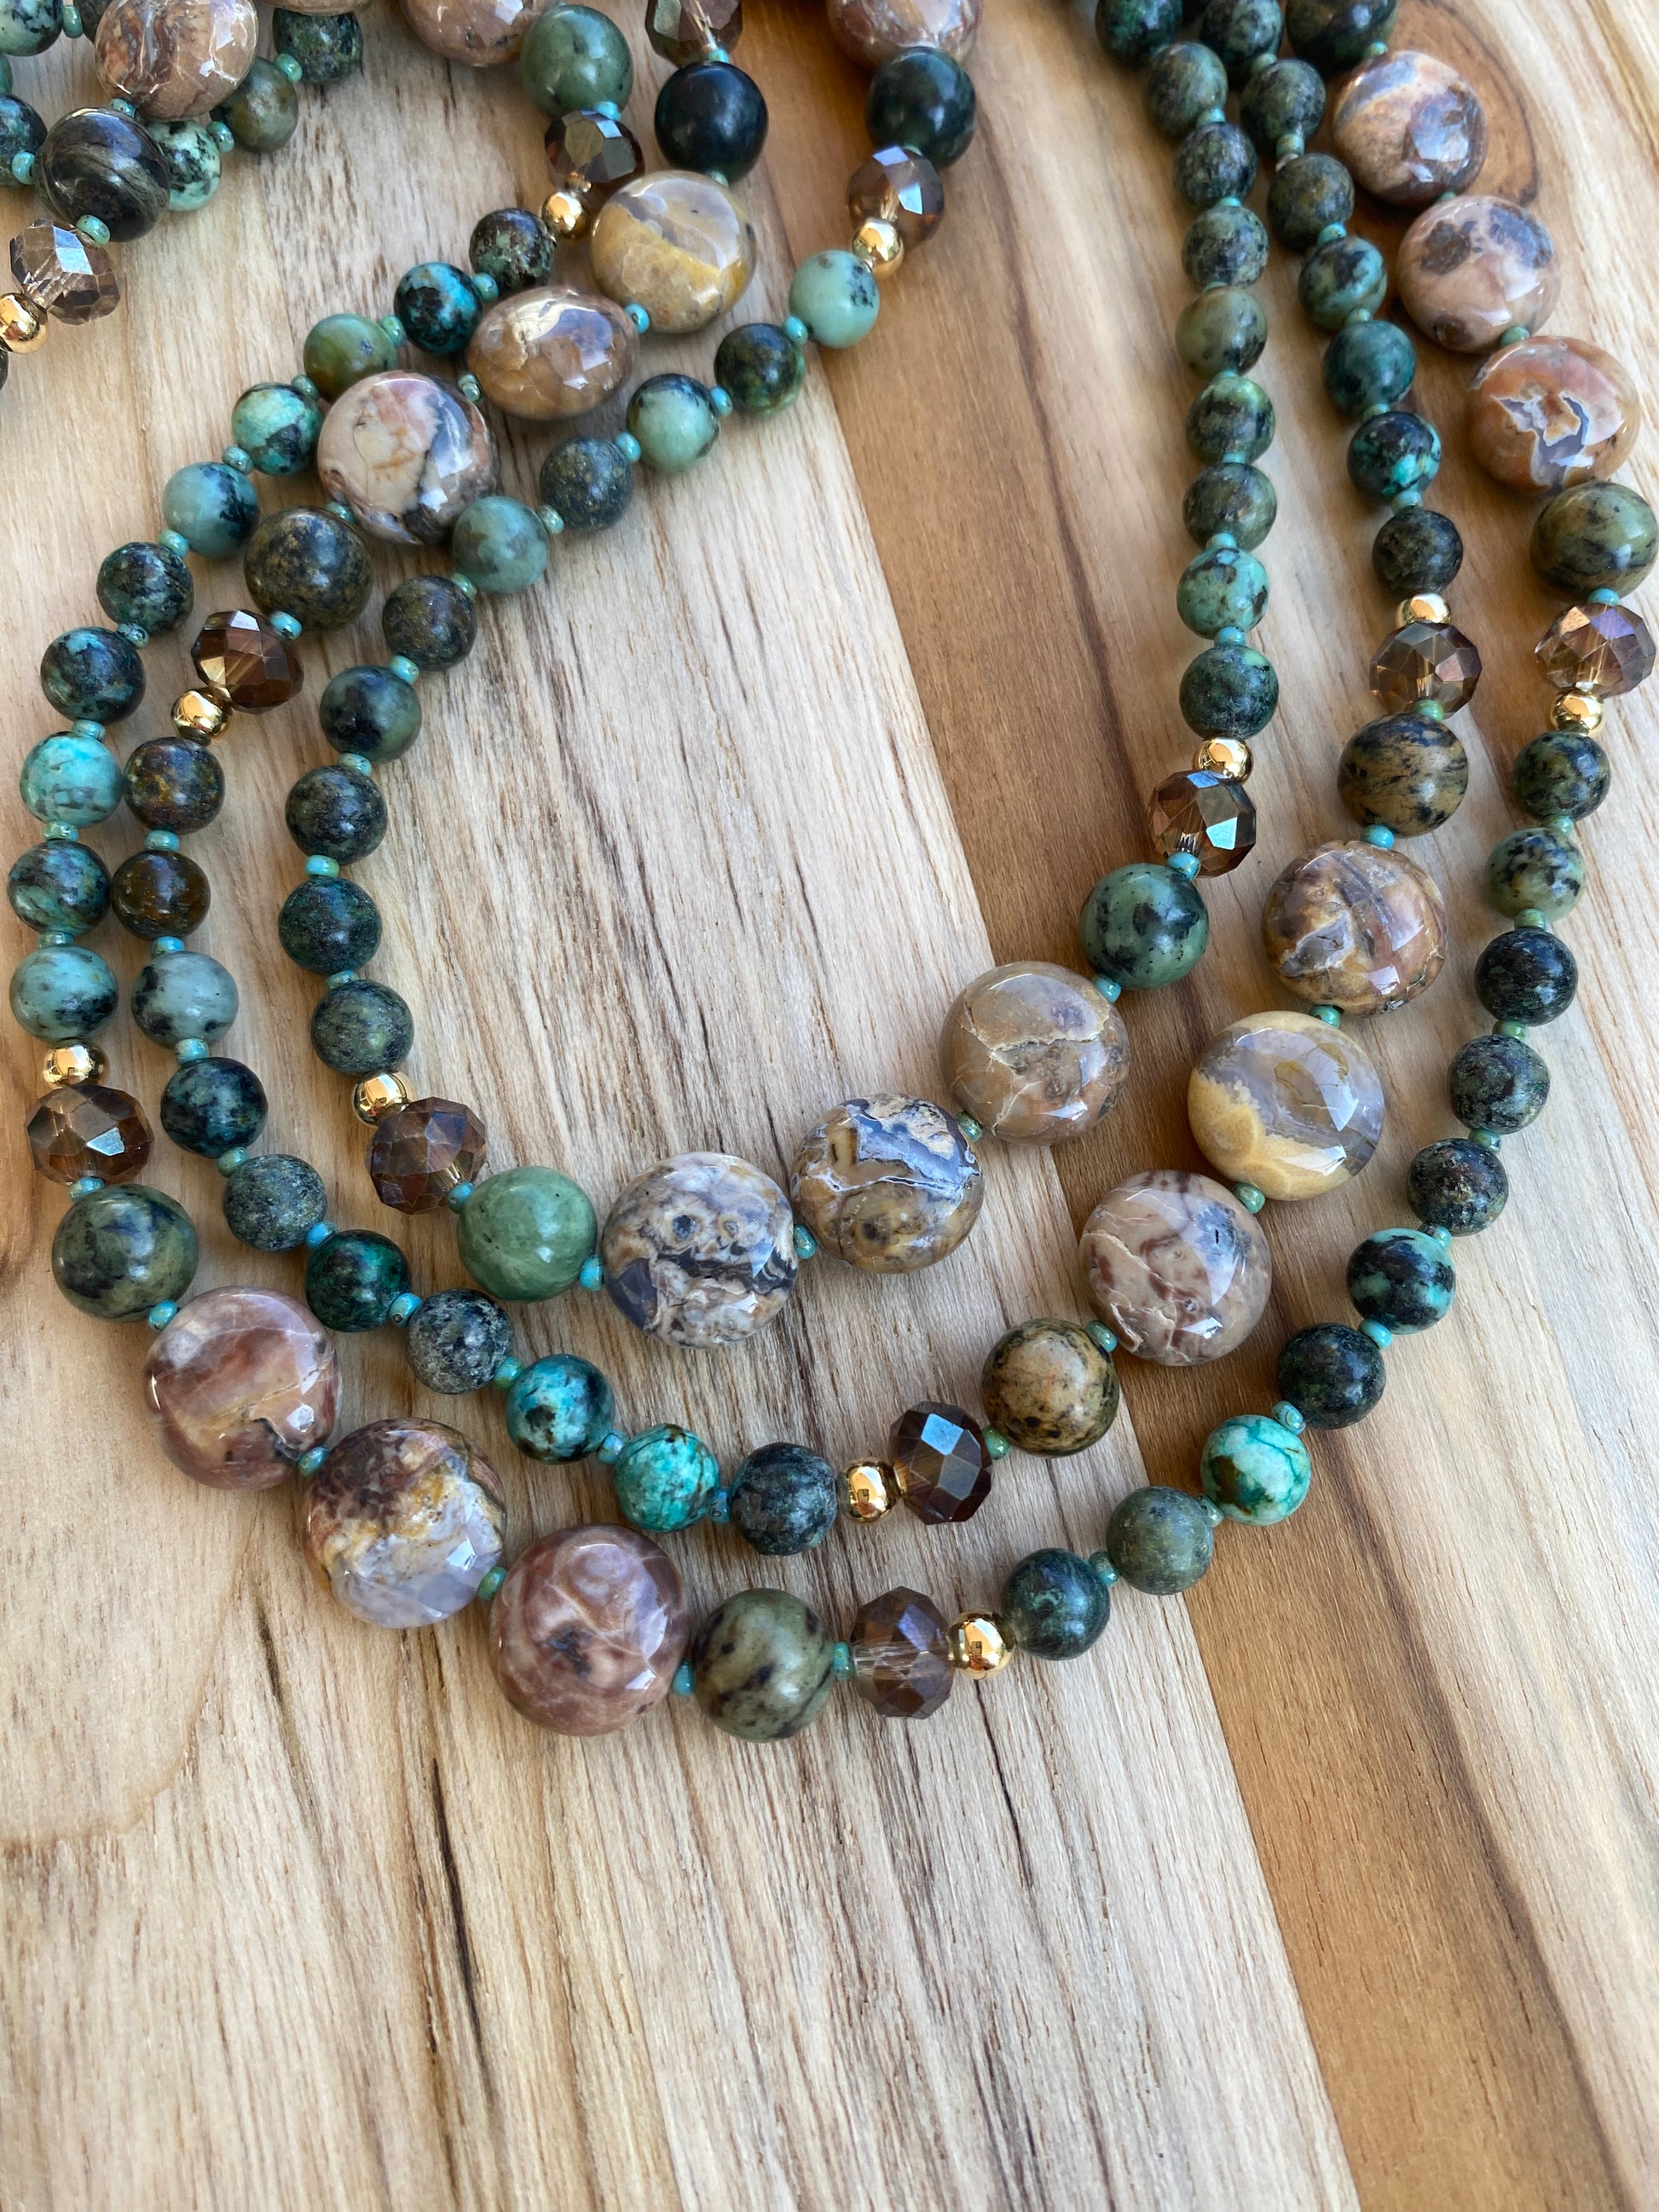 Extra Long Beaded Necklace with Crazy Lace Agate Green Jasper and African Turquoise Beads - My Urban Gems